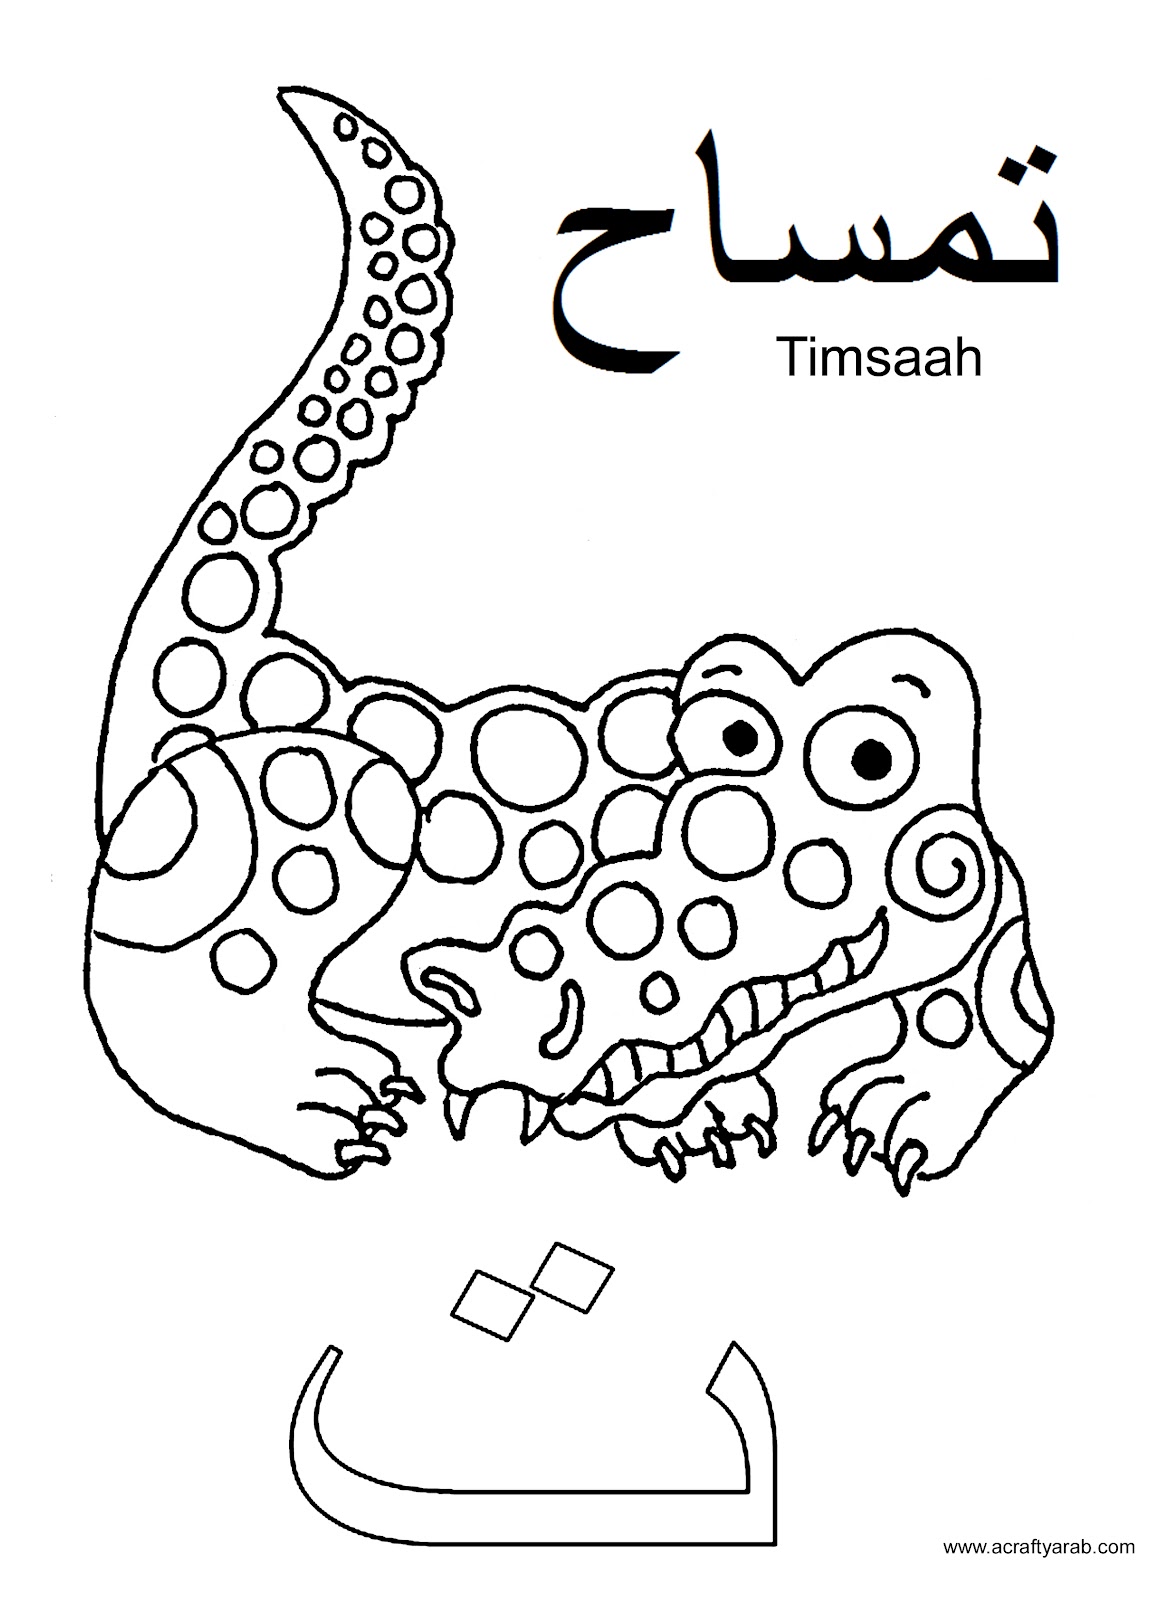 Alphabet Coloring Pages Pdf at GetColorings.com | Free printable colorings pages to print and color